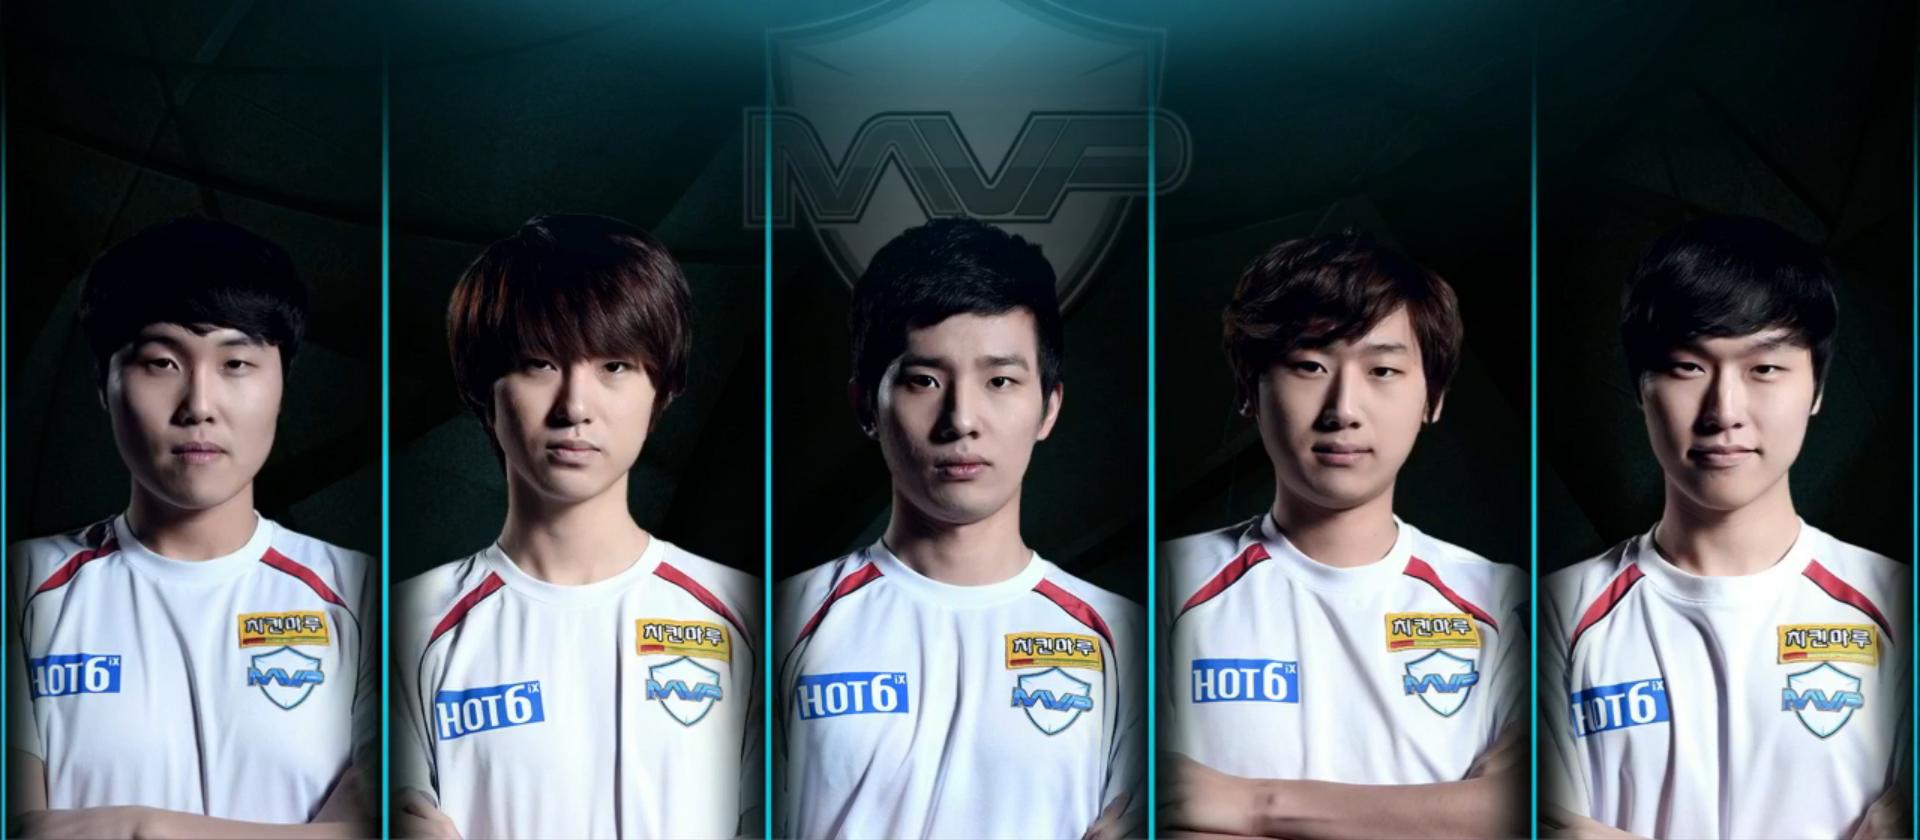 Dota 2 Feature : MVP.Phoenix: Can they rise from the ashes